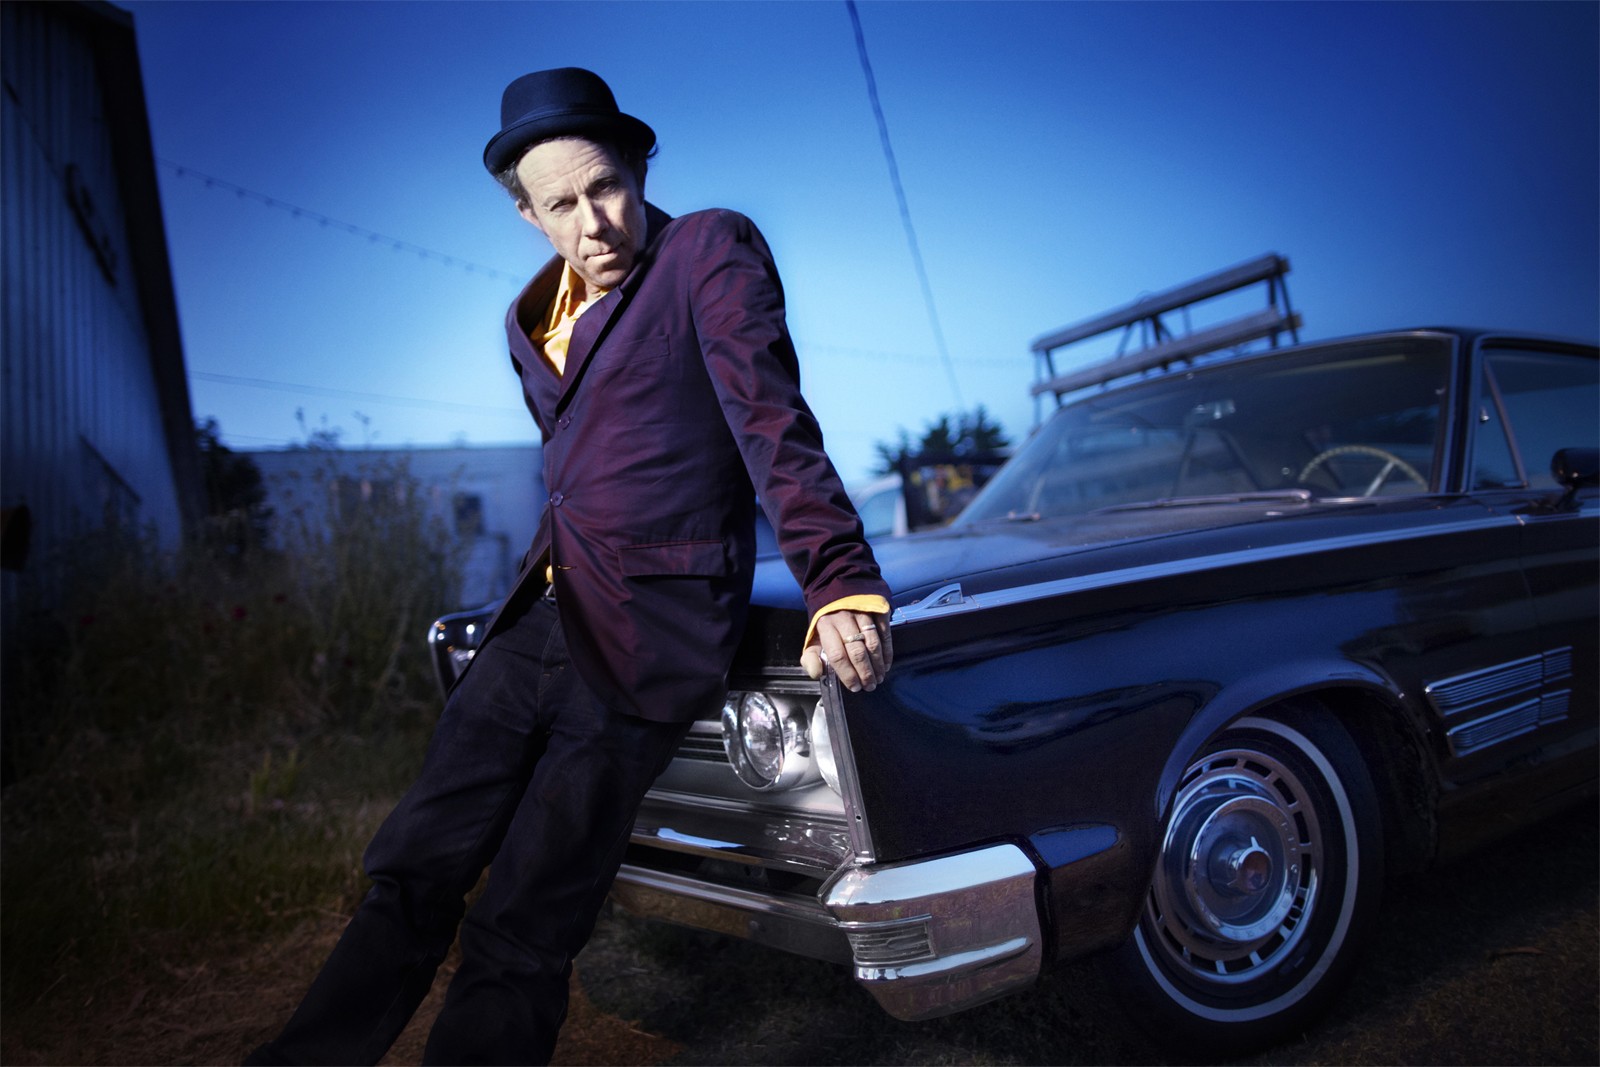 Tom Waits Musician Songwriters Actor Singer 1600x1067